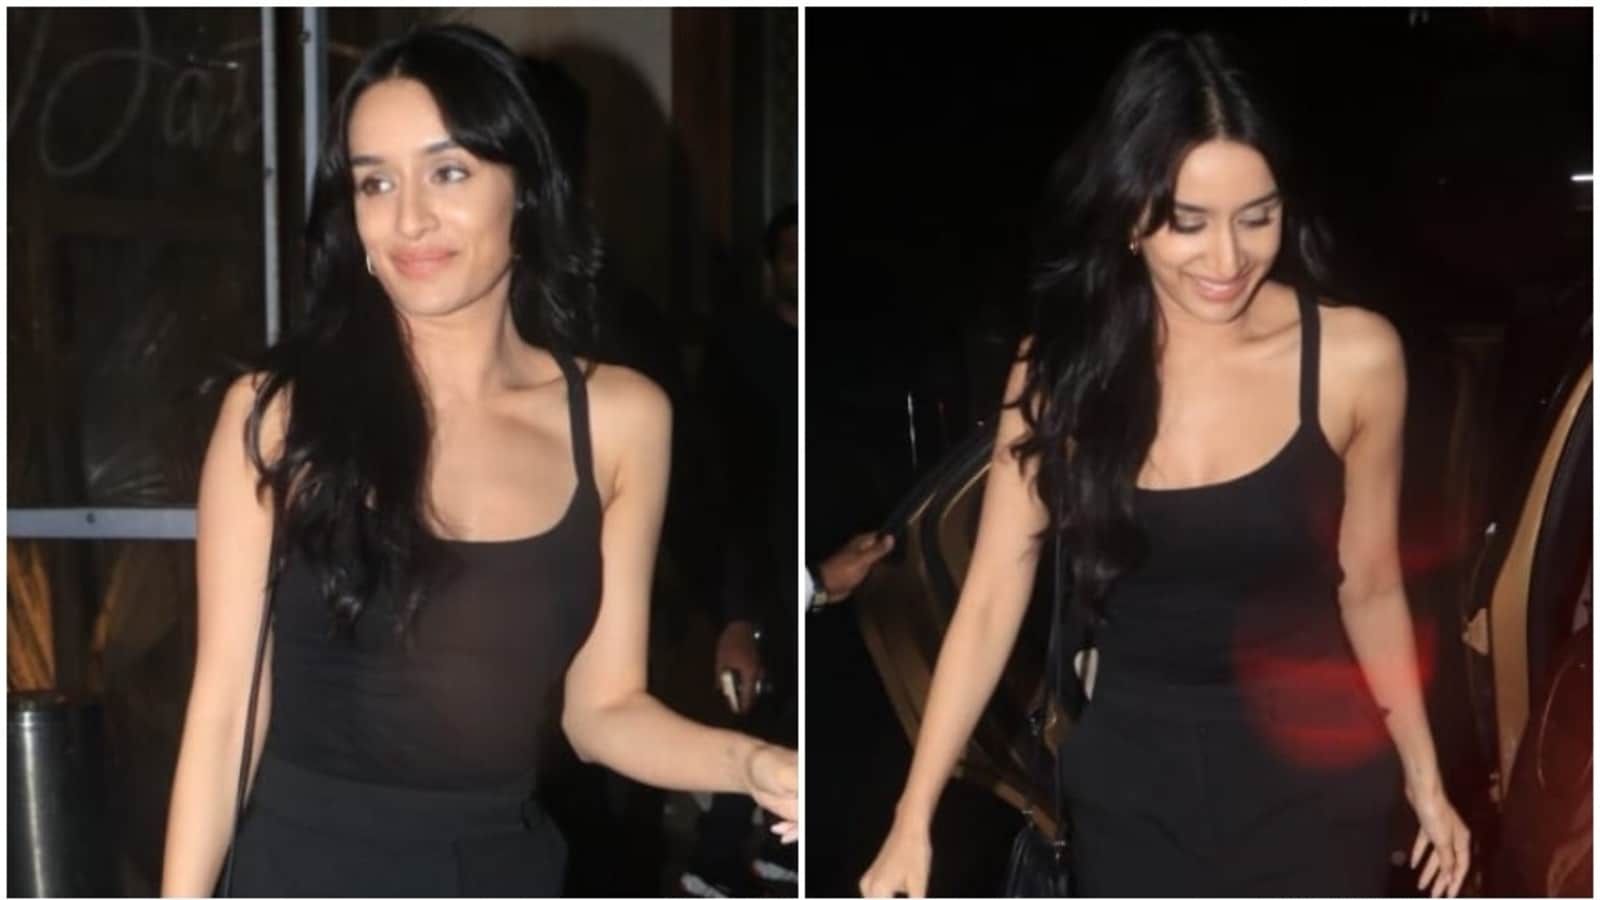 Xxx Video Hd Shardha Kapoor - Shraddha Kapoor in black tank top and satin pants pulls off effortless  girl-next-door look: See pics and video | Fashion Trends - Hindustan Times